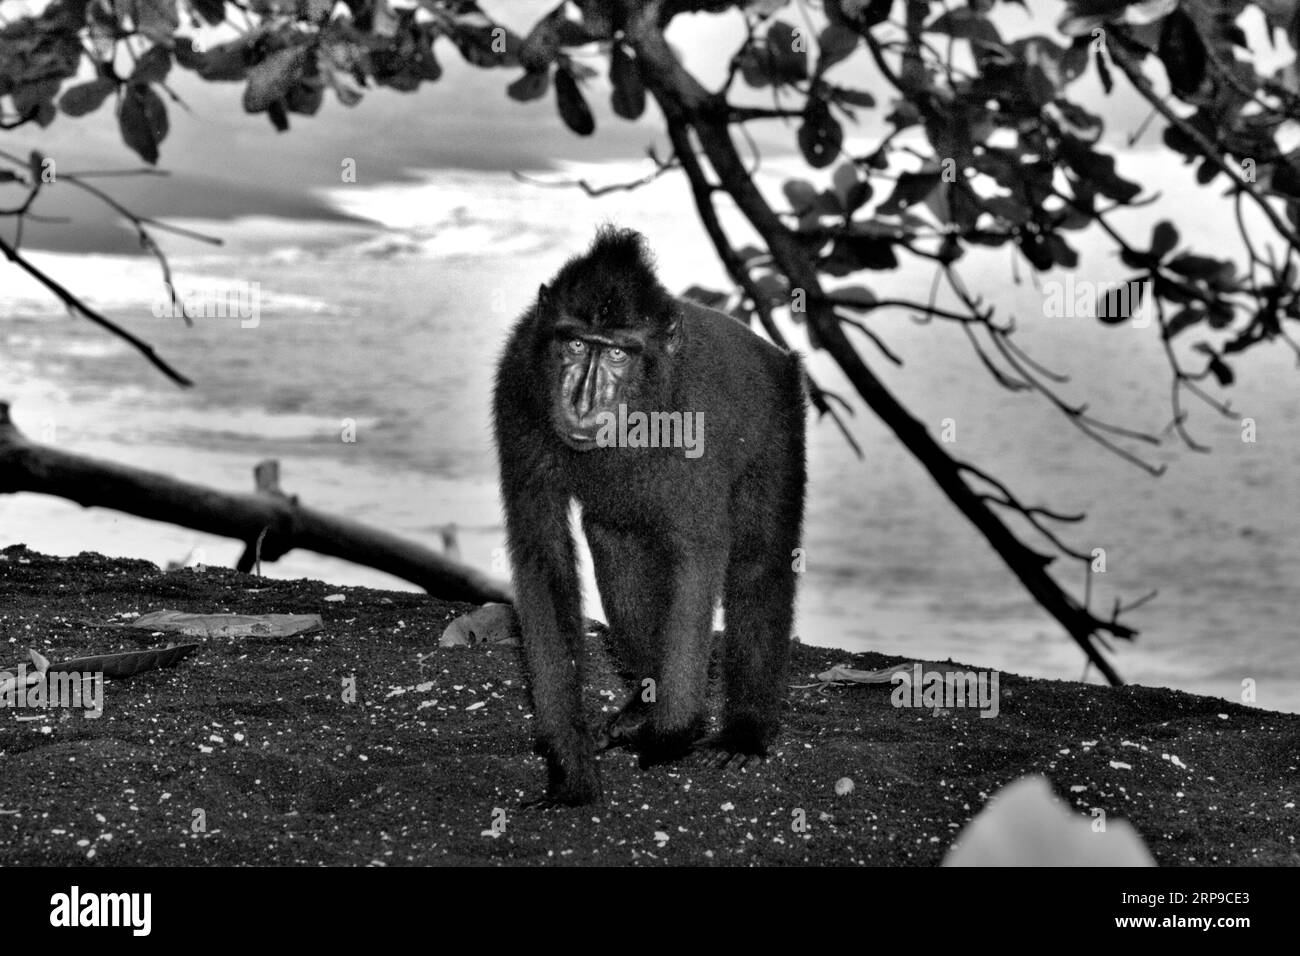 A Sulawesi black-crested macaque (Macaca nigra) stares while being photographed, as it is standing on a beach in Tangkoko forest, North Sulawesi, Indonesia. Climate change and disease are emerging threats to primates, while crested macaque belongs to the 10% of primate species that are highly vulnerable to droughts. A recent report revealed that the temperature is indeed increasing in Tangkoko forest, and the overall fruit abundance decreased. 'In a warmer future, they (primates) would have to adjust, resting and staying in the shade during the hottest times of the day. Stock Photo